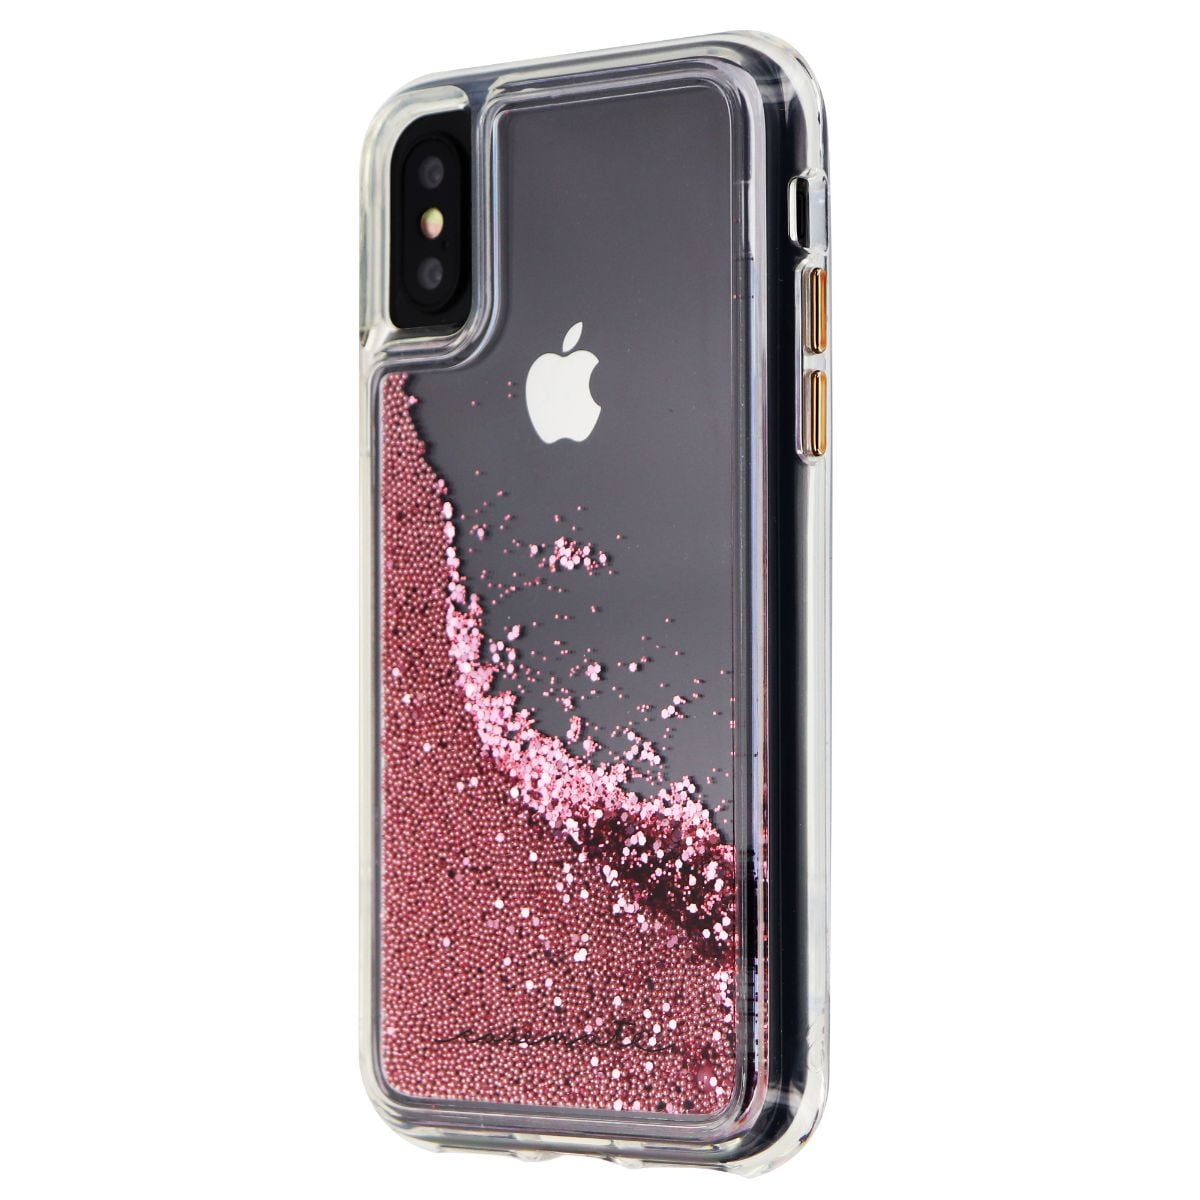 Case Mate Waterfall Phone Case For Iphone X Xs Rose Gold Walmart Canada